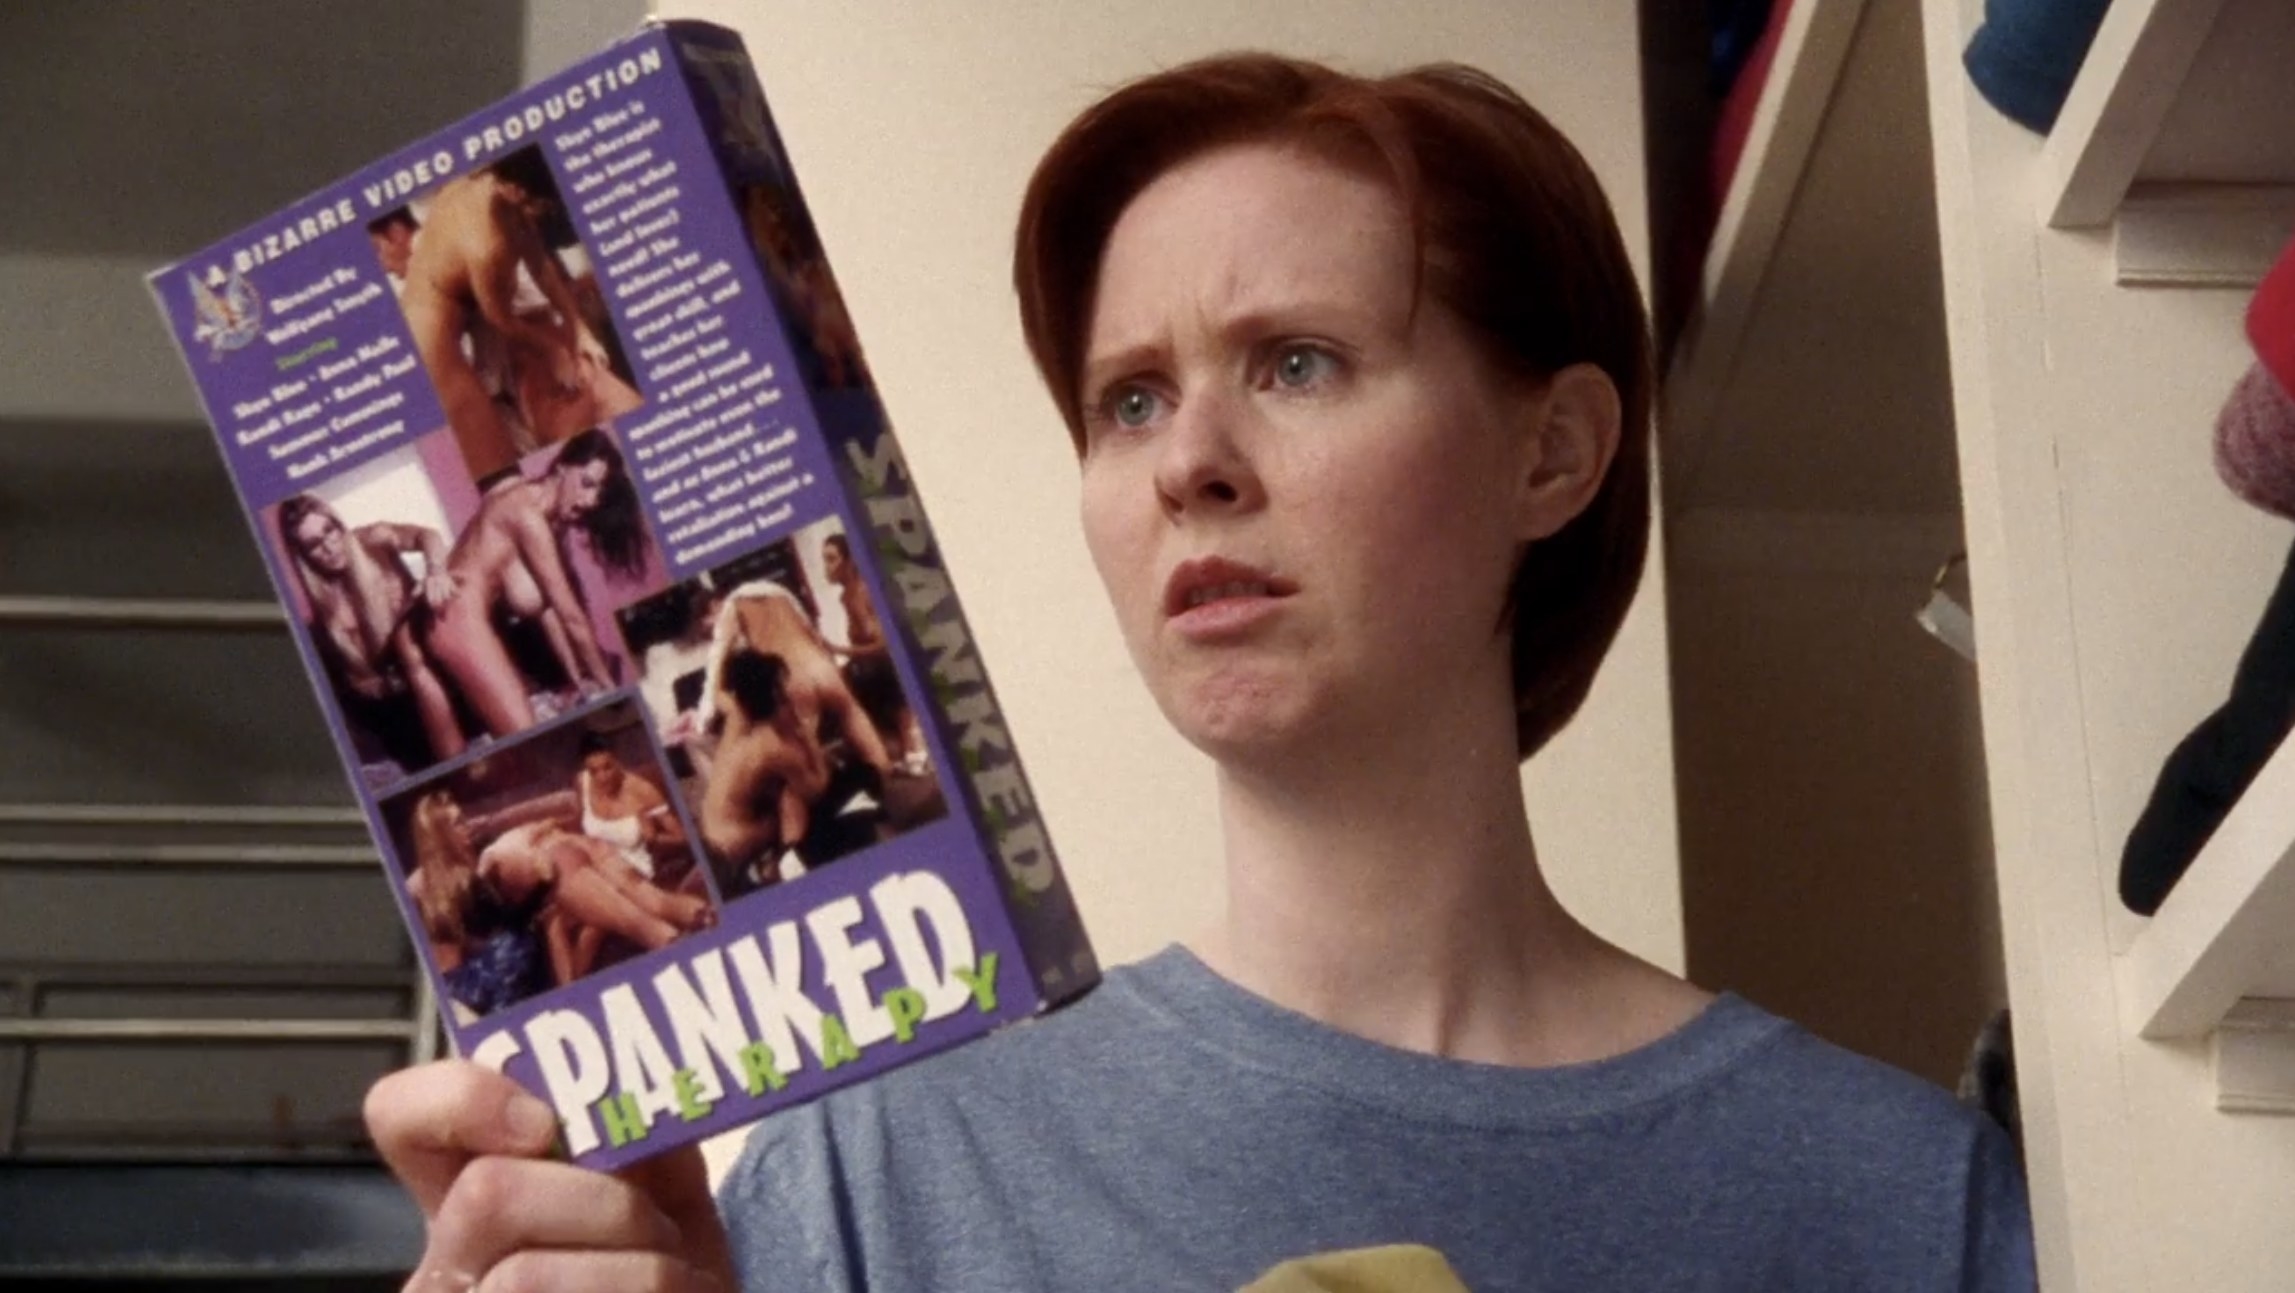 Miranda looking at a porn tape called Spanked on Sex and the City